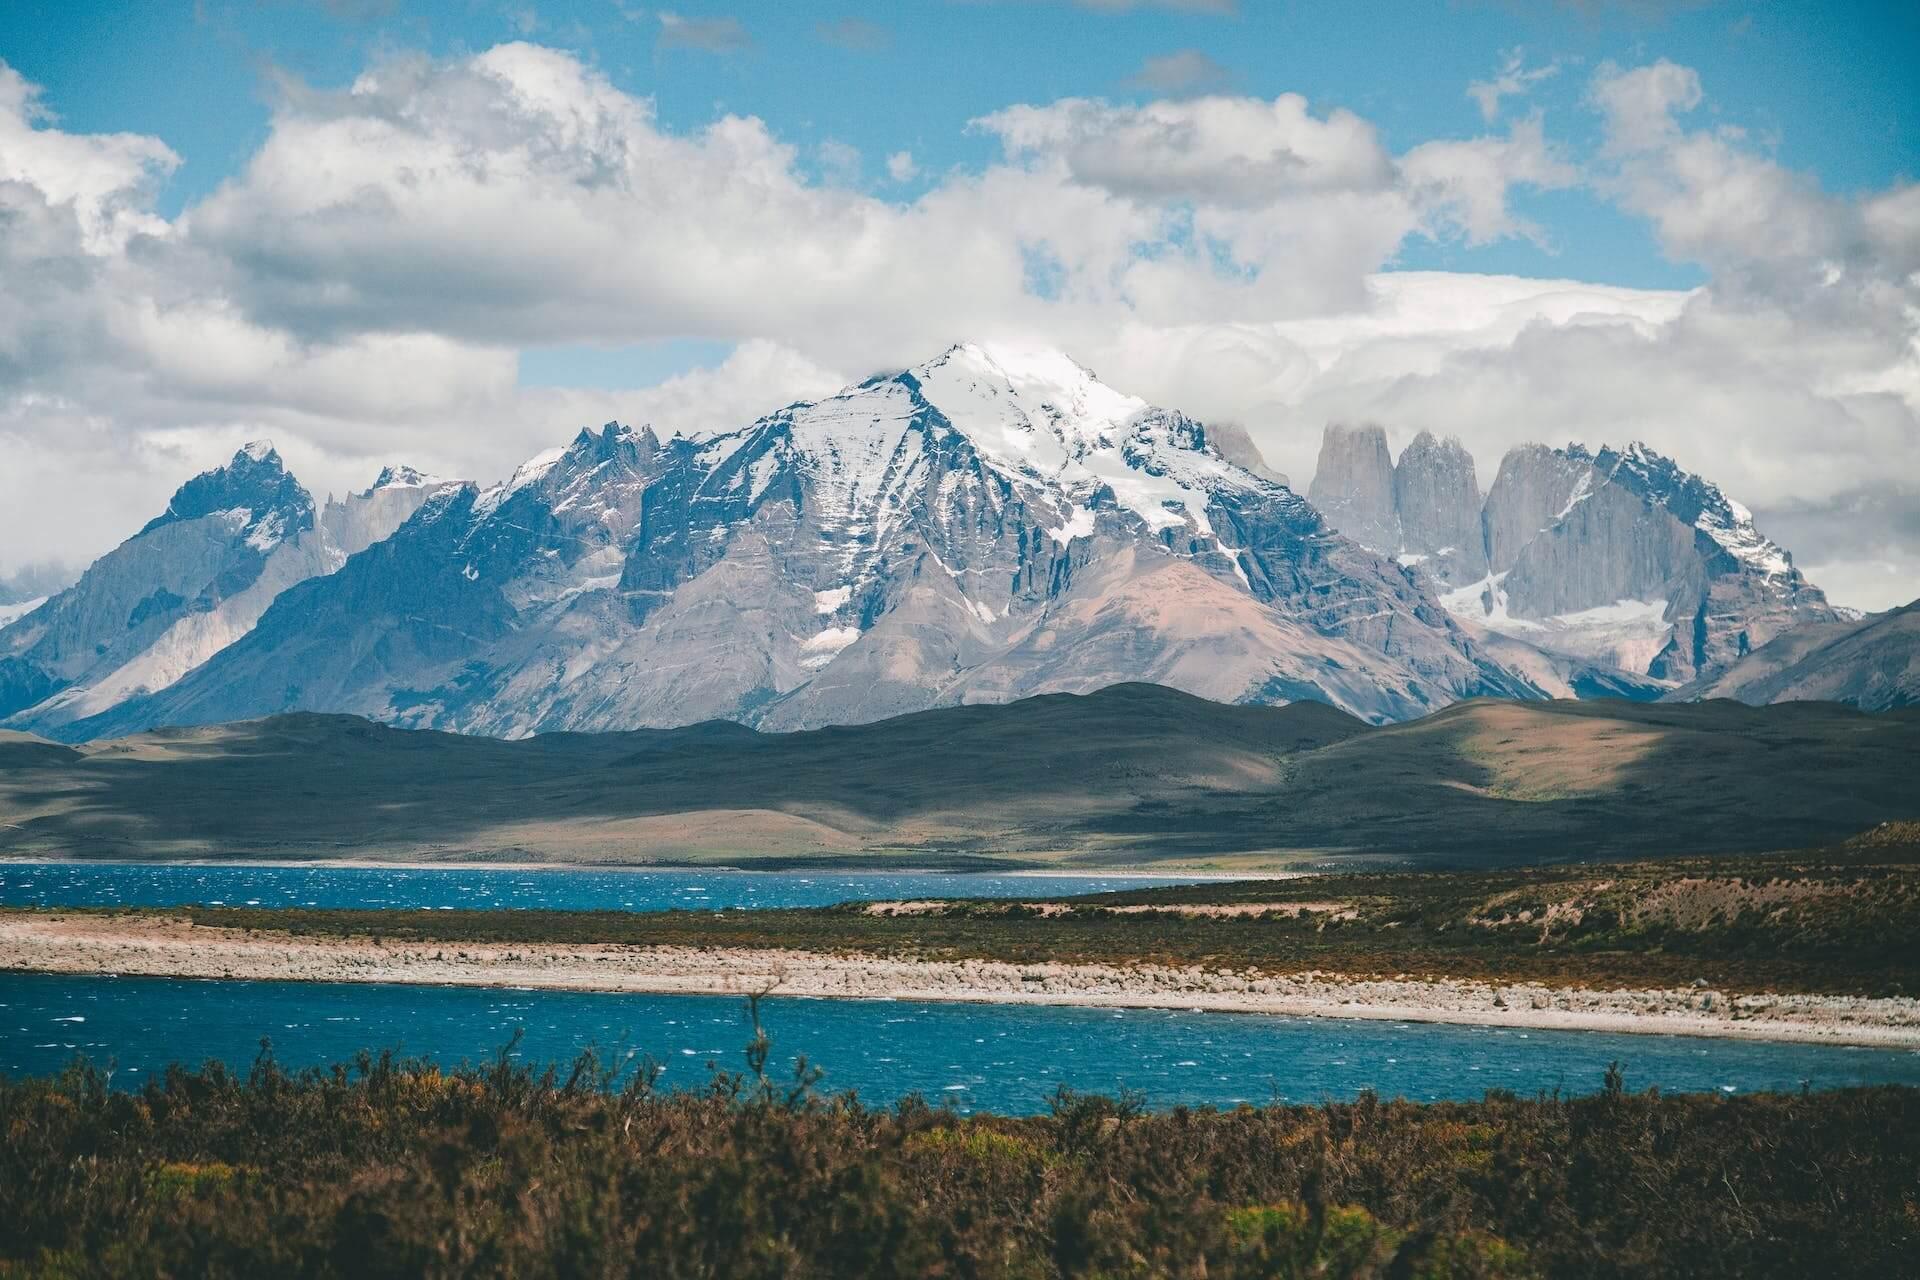 View of lake and mountains in Patagonia National Park, Chile